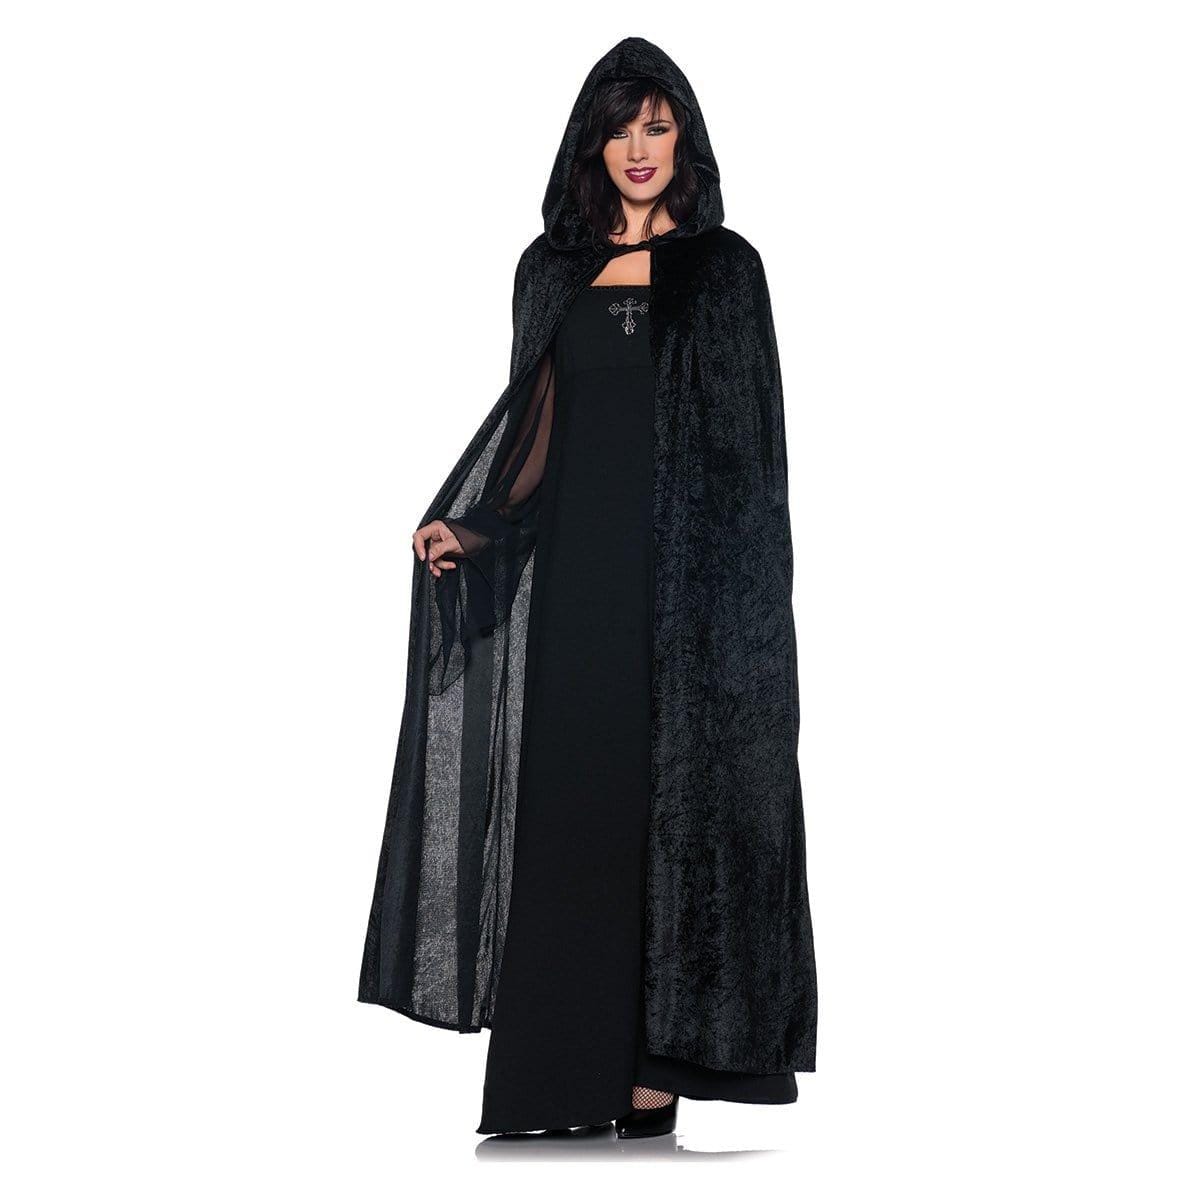 Buy Costume Accessories Black hooded cloak for adults sold at Party Expert